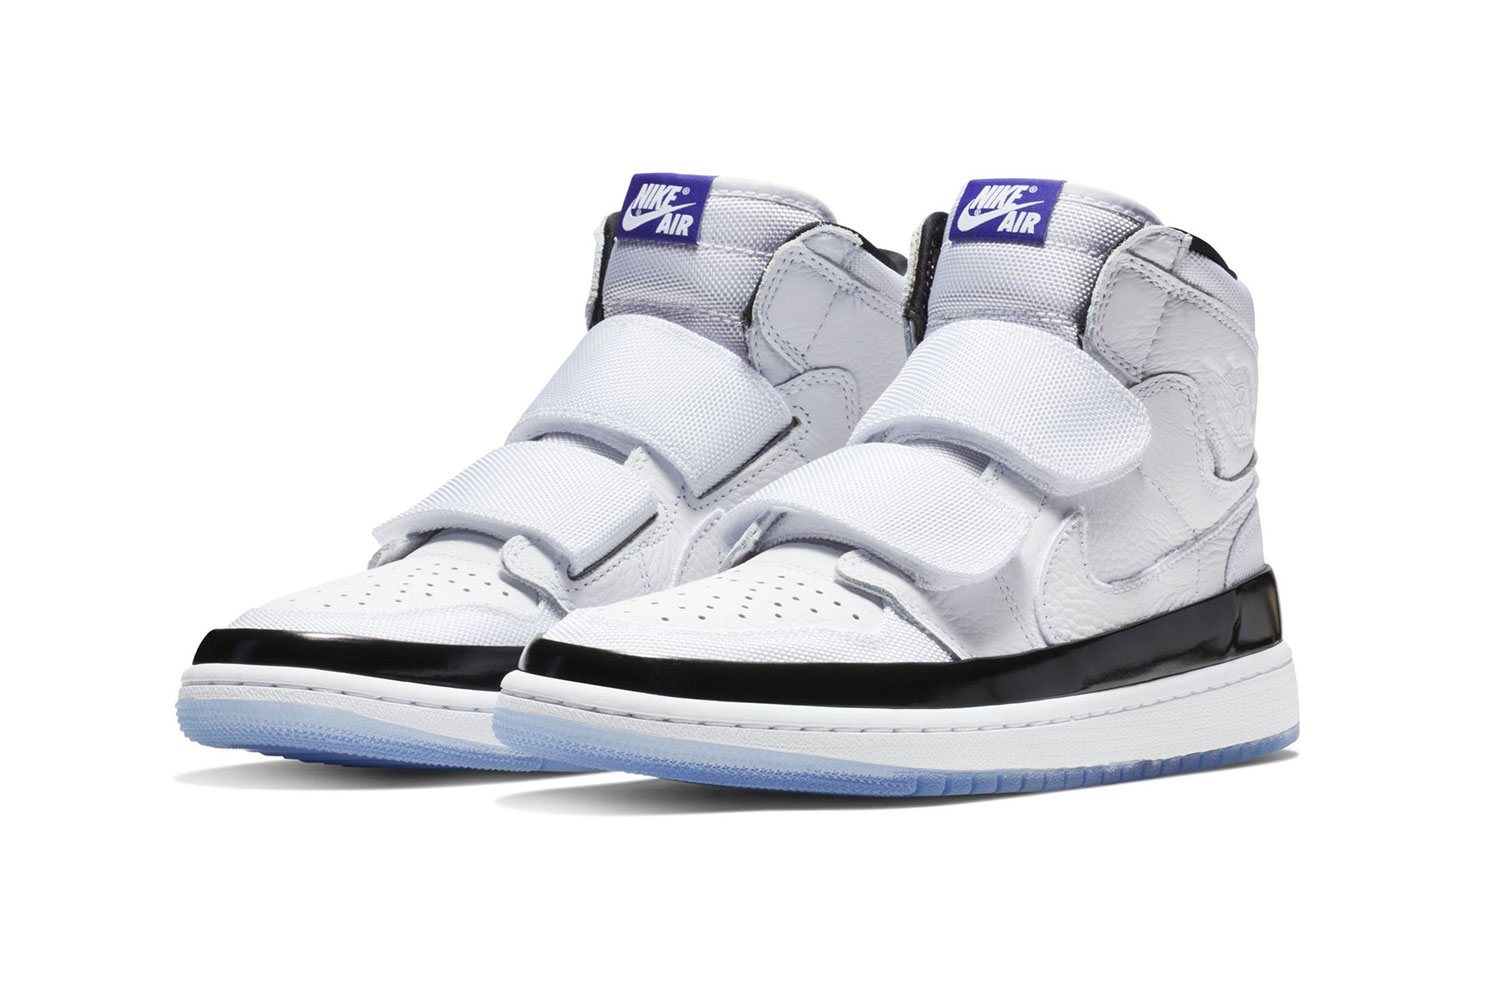 designer Absorb Adult Air Jordan 1 High Double Strap “Concord” | Drops | Hypebeast